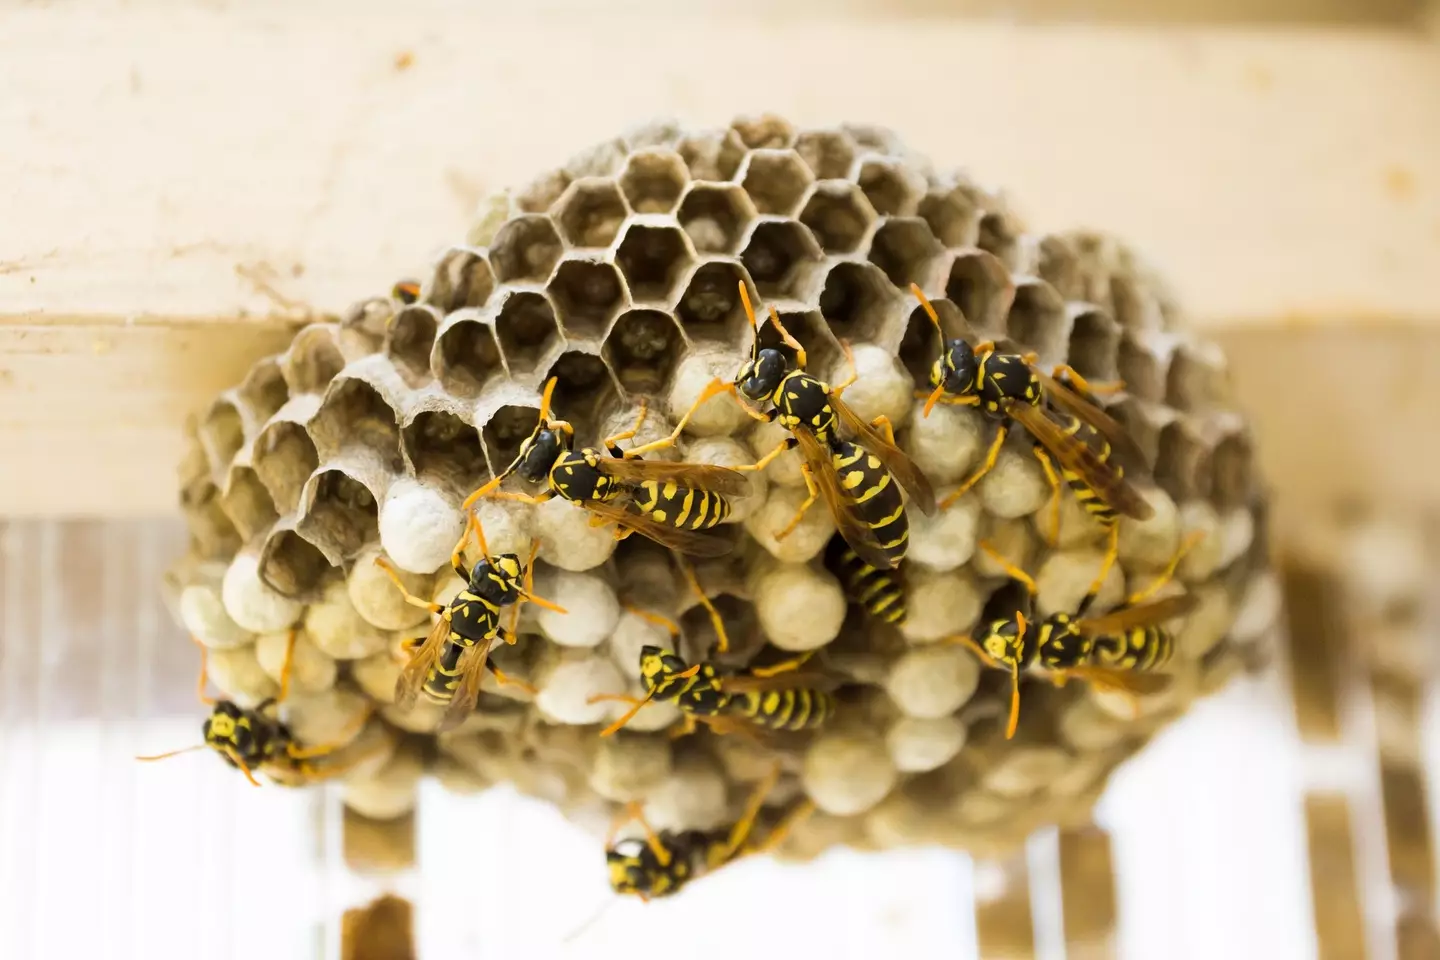 Wasps are thought to enjoy sugar, so can be attracted to fizzy drinks, sugary alcohol and treats like ice cream.